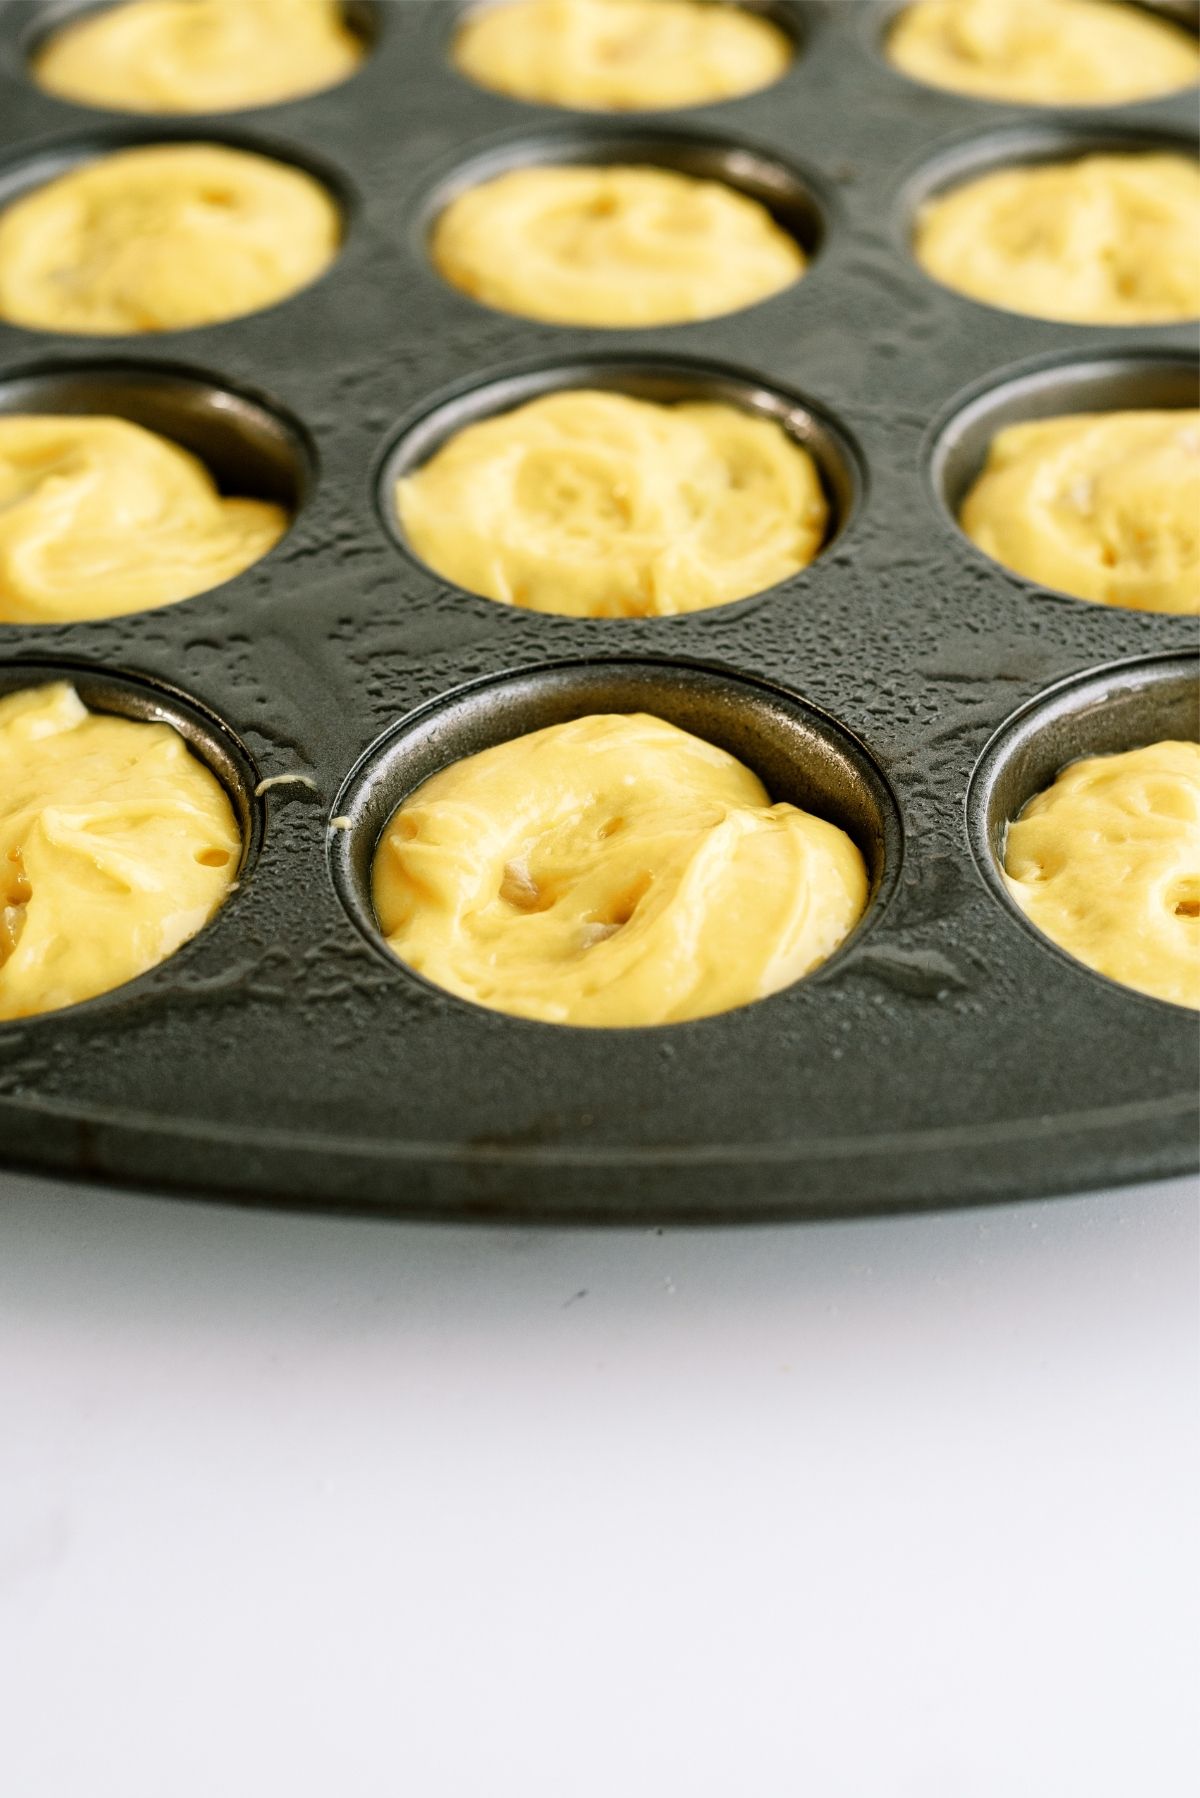 Unbaked Mini Pineapple Upside Down Cakes in muffin tin